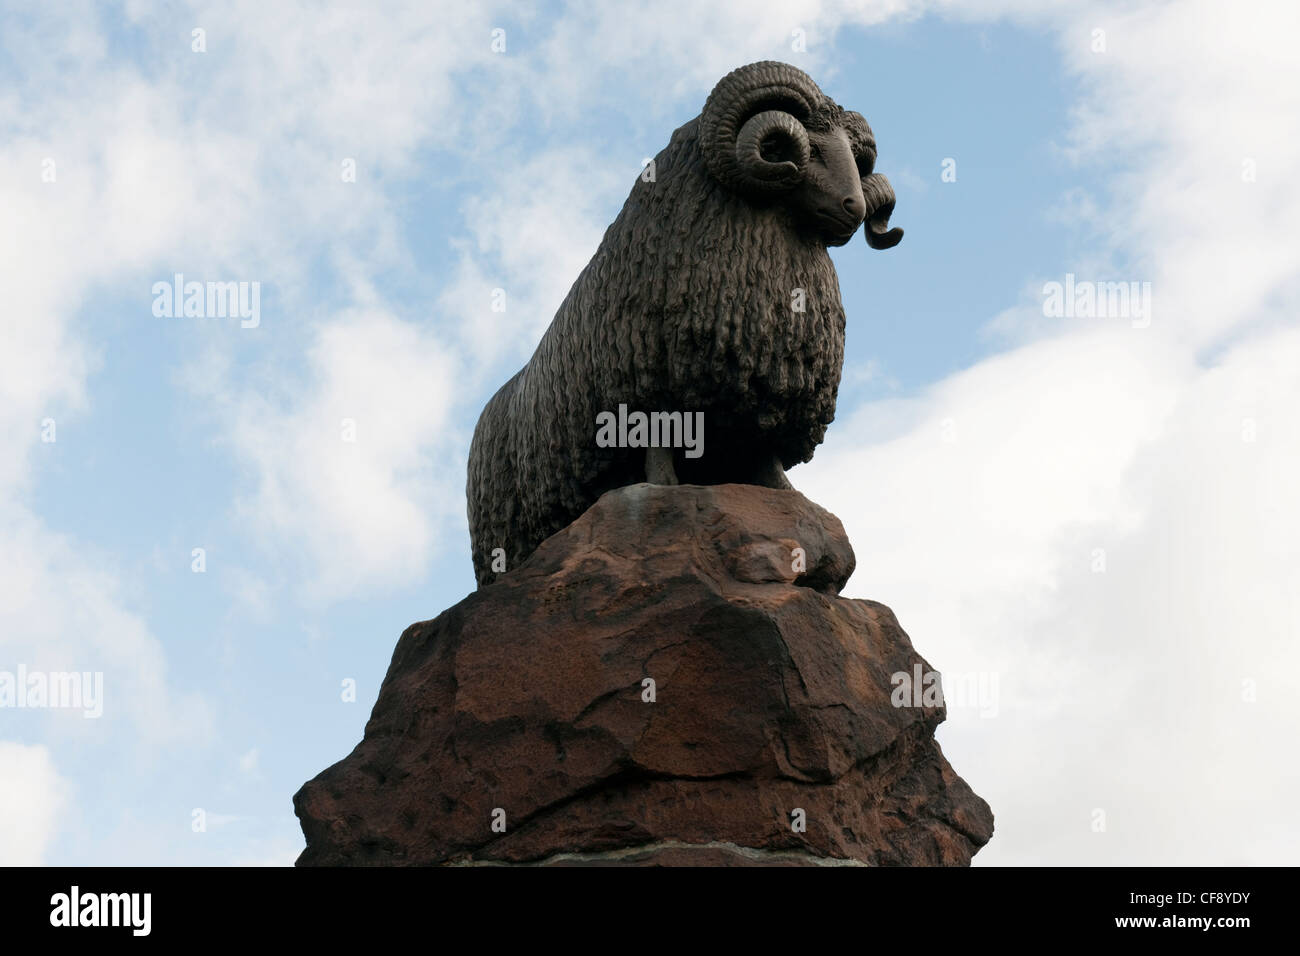 Moffat was a market town which traded in wool, & this is commemorated with a statue of a ram by William Brodie in town's Stock Photo